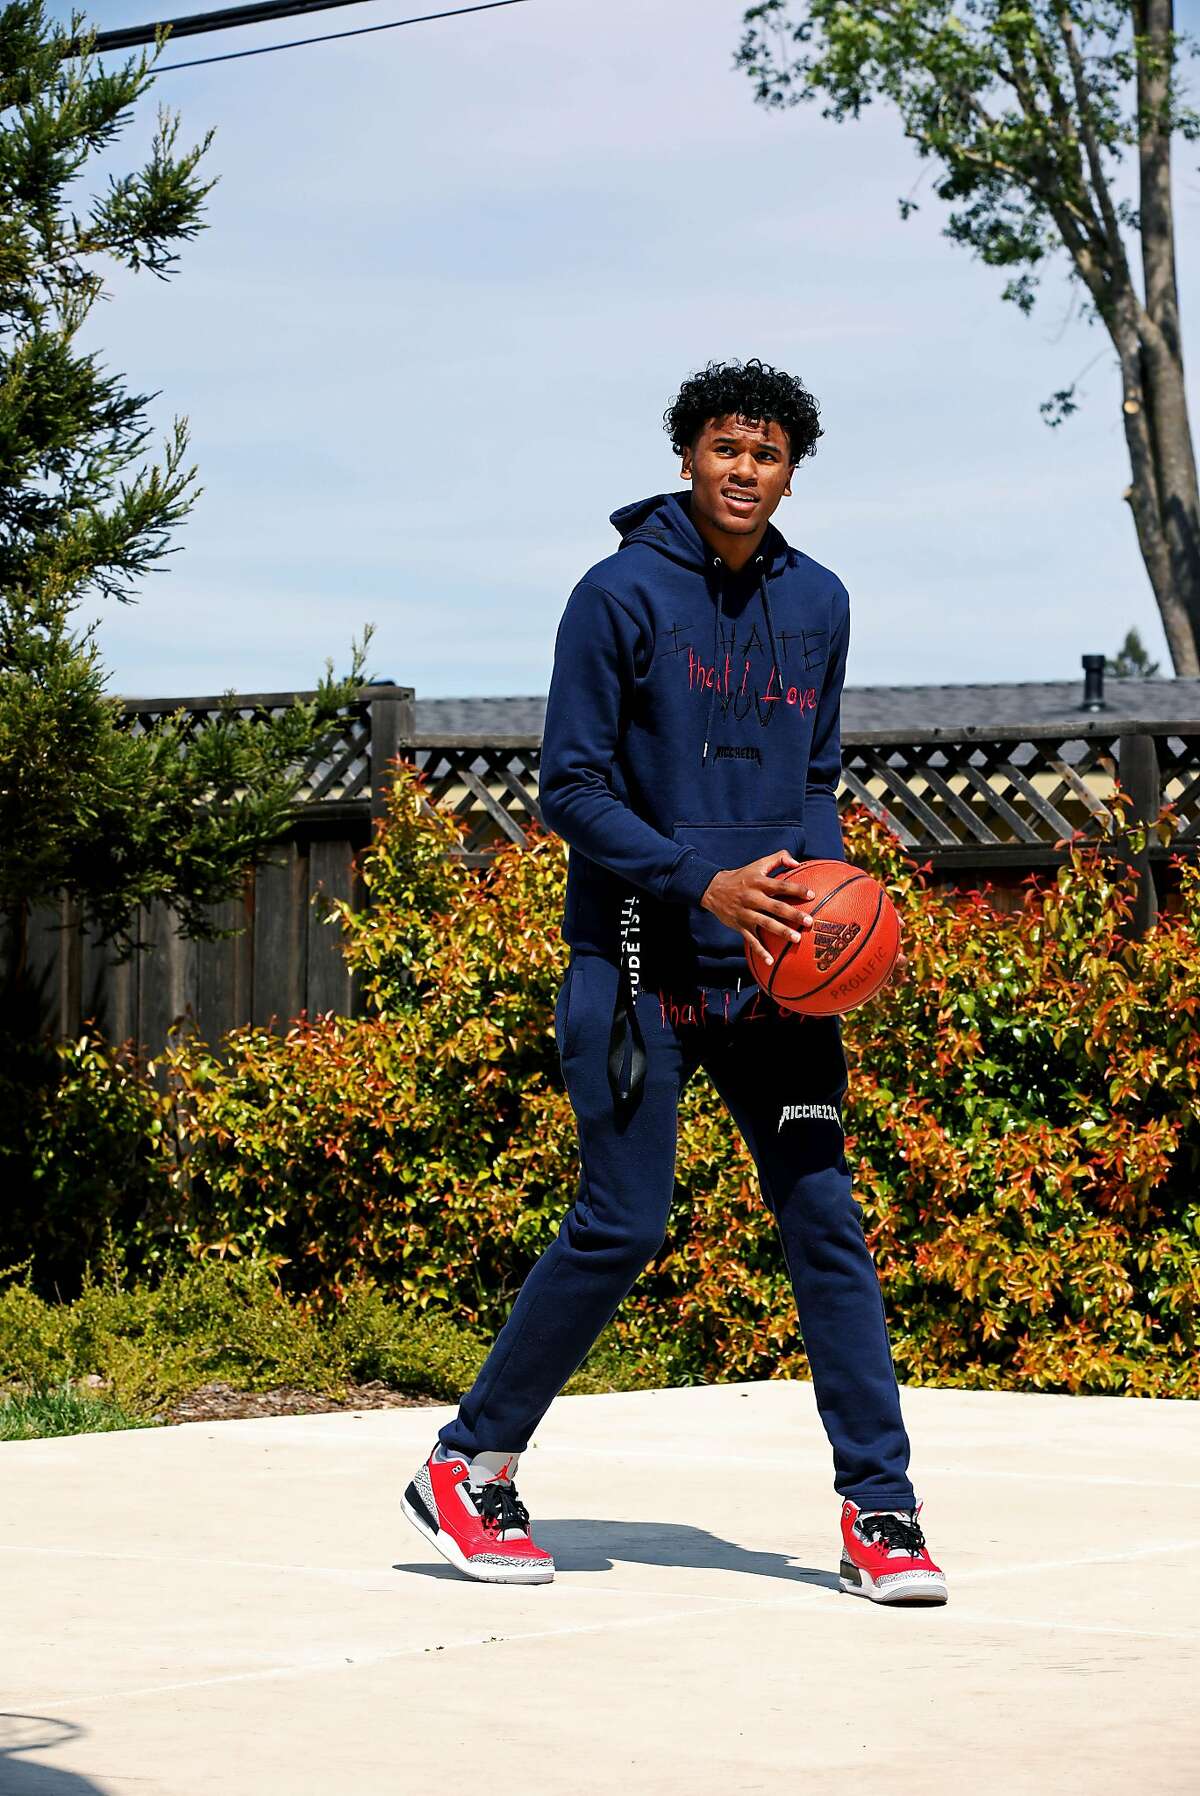 High School basketball star Jalen Green, 18, shoots a basket in his neighborhood on Friday, March 27, 2020, in Napa, Calif. The 6'6" guard is expected to be the No. 1 men's basketball recruit in the 2020 class.